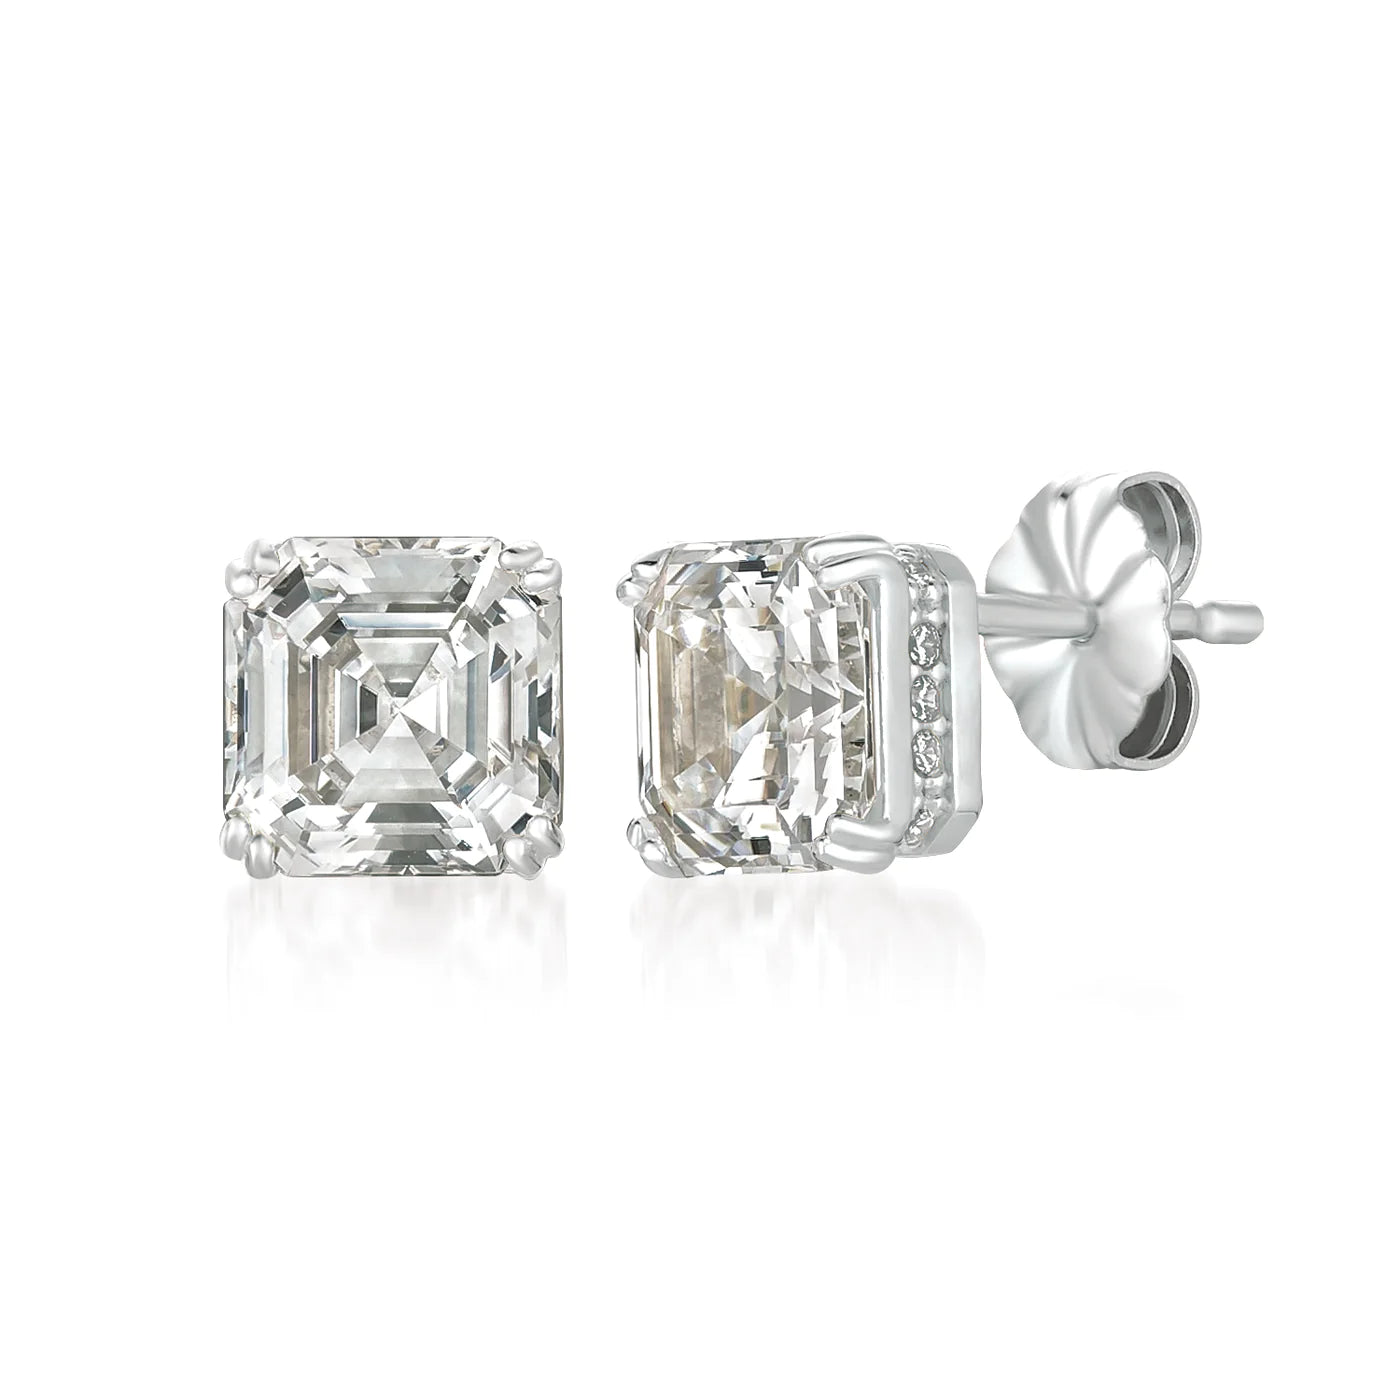 Royal Asscher Cut Stud Earrings Finished in Pure Platinum